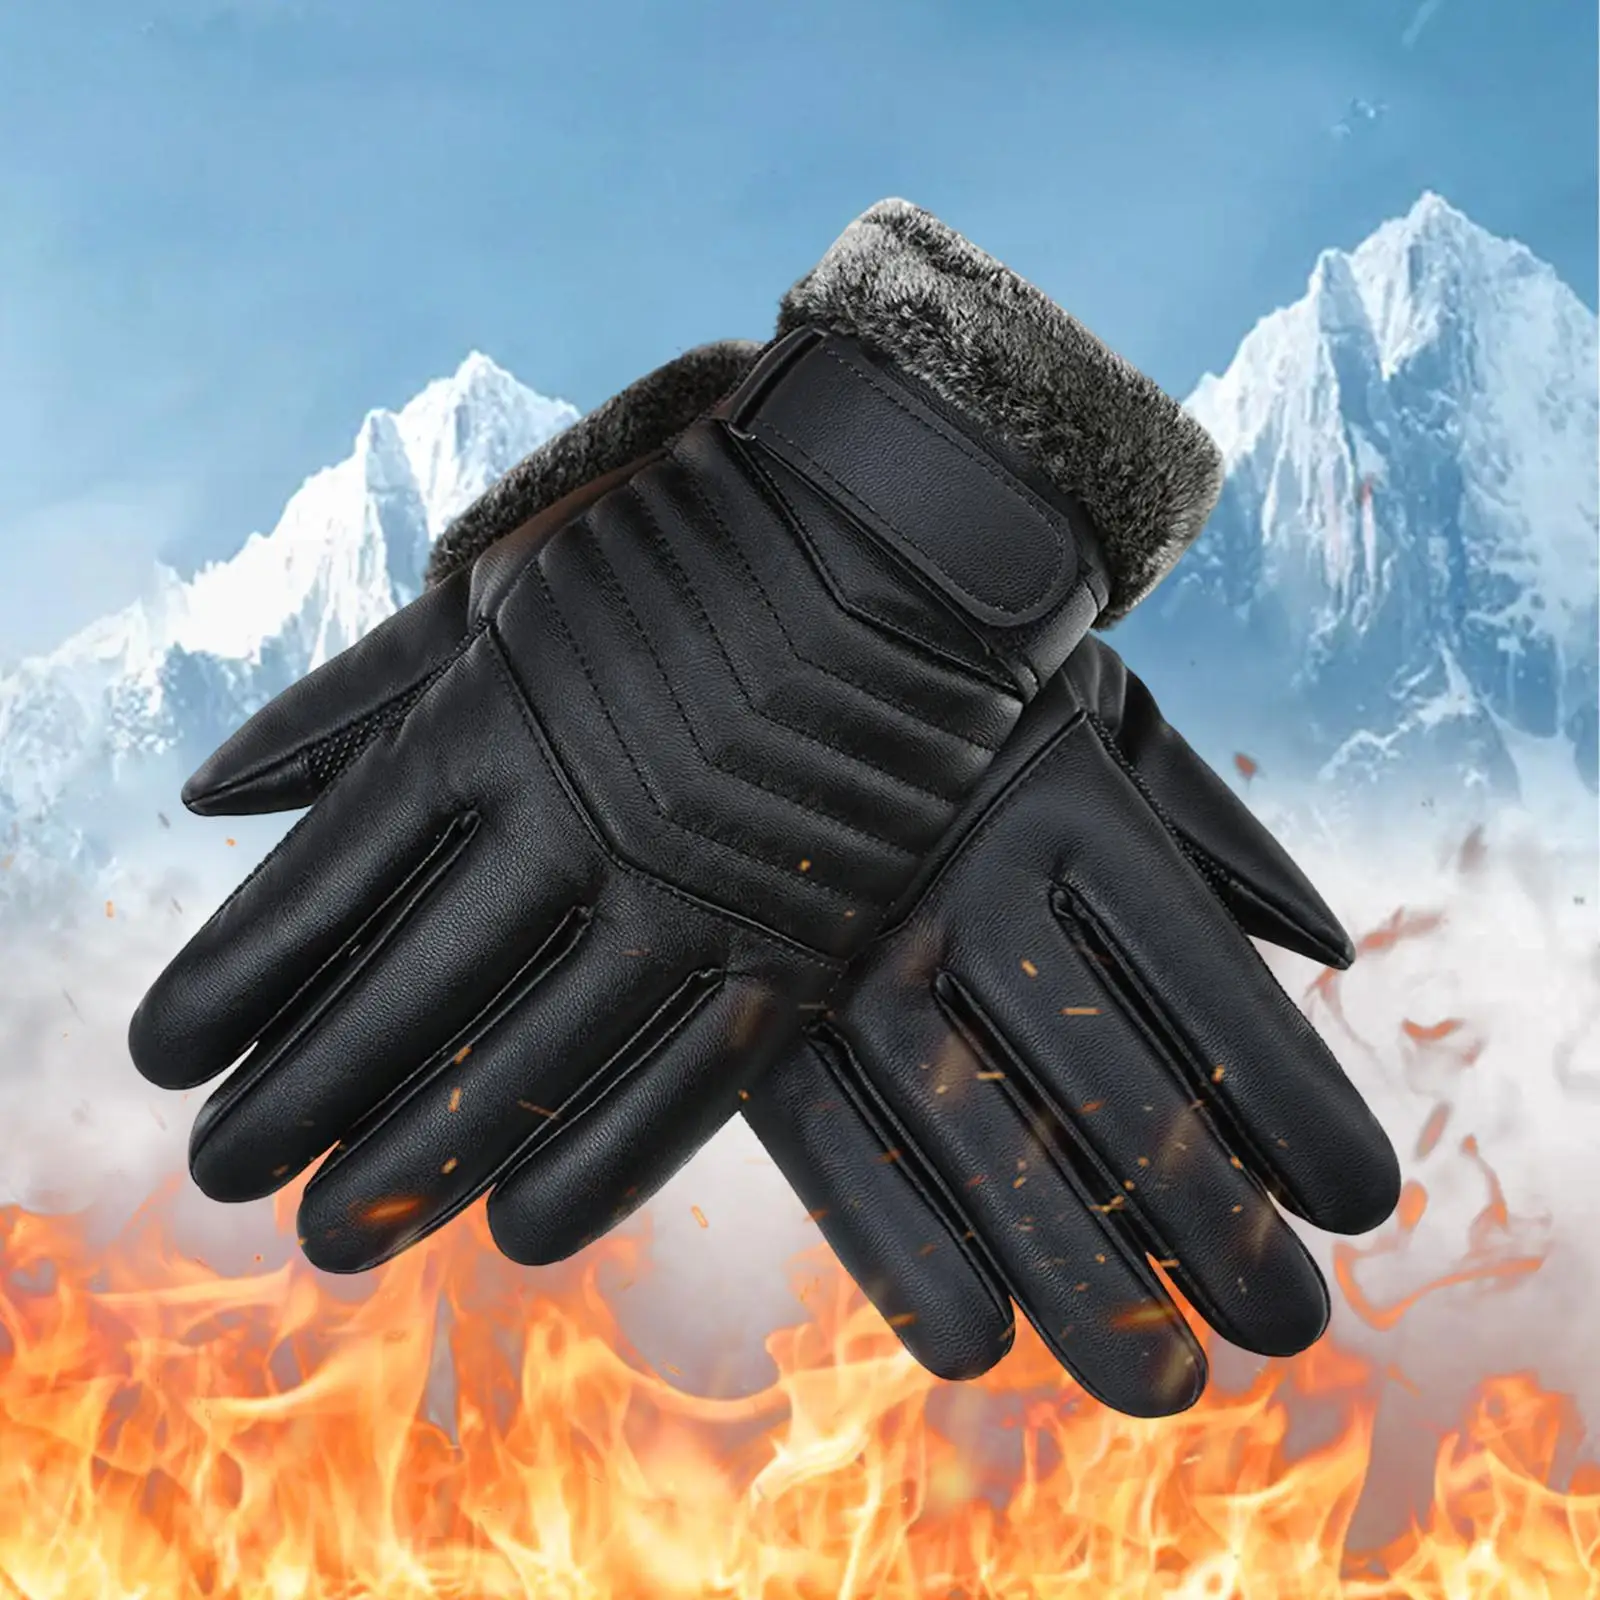 Winter Gloves Touchscreen Comfortable Durable Weather Resistant Thermal Gloves for Driving Riding Typing Outdoor Sports Racing